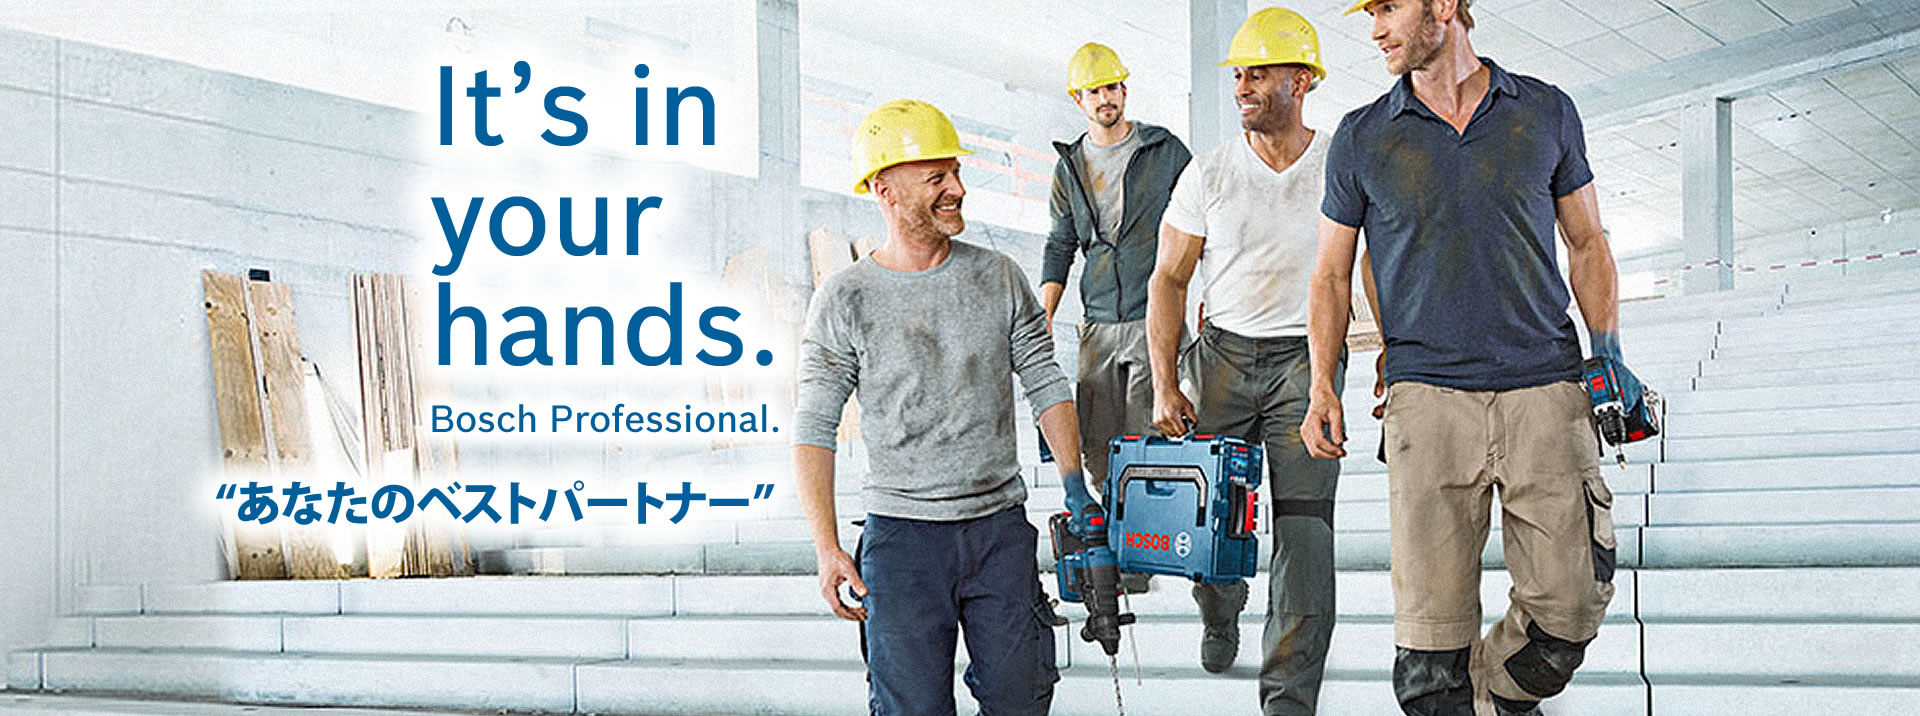 It's in your hands. Bosch Professional. “あなたのベストパートナー”